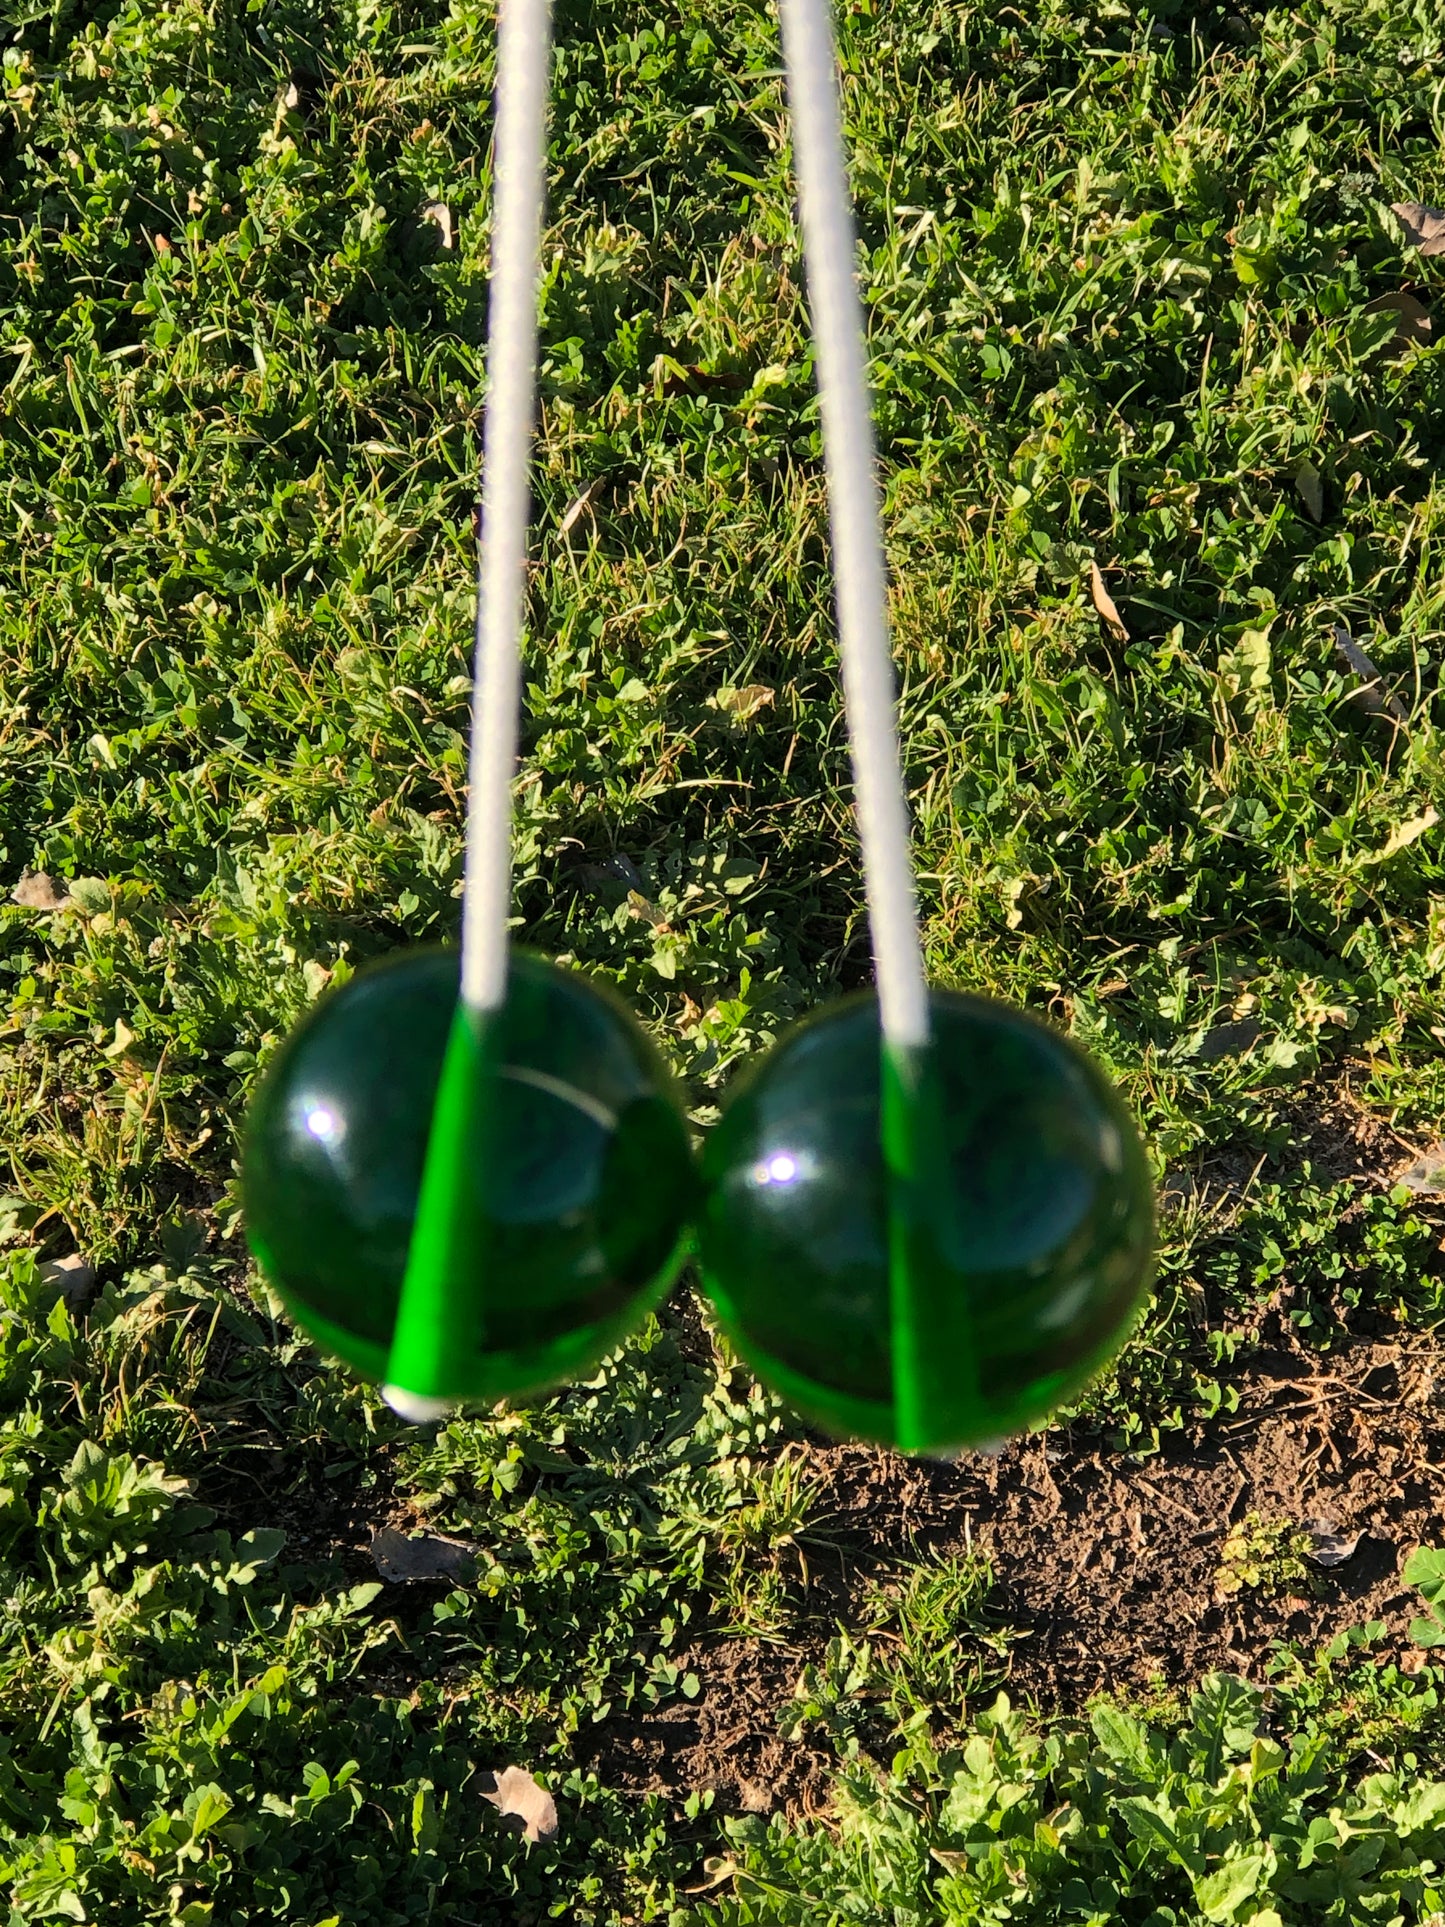 Ceyda Clackers Click Clacks Noise Maker Toy (Green)